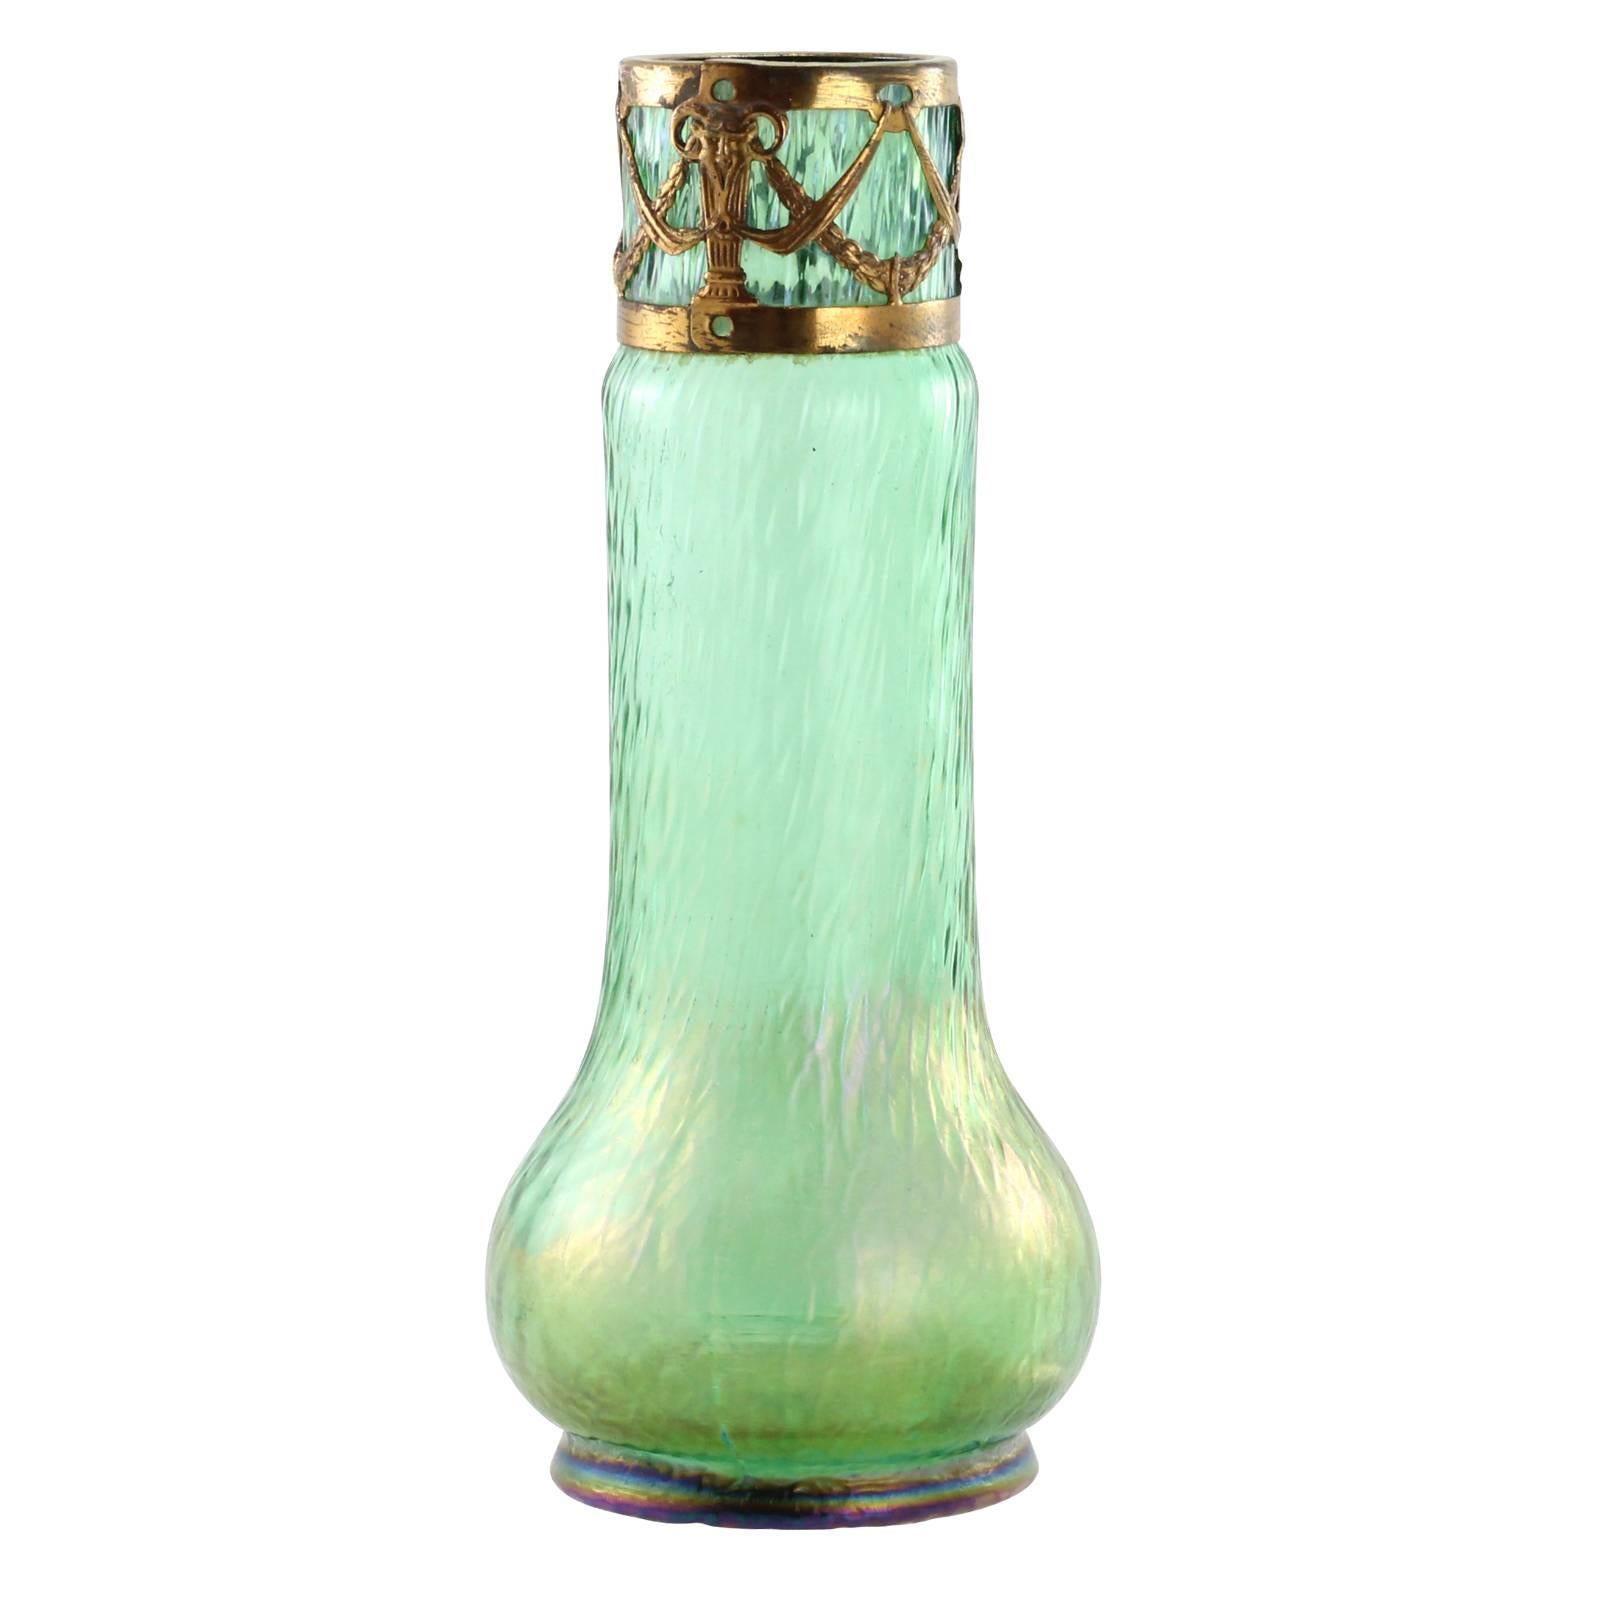 A late 19th century Art Nouveau glass vase by Carl Stölzle. Completed in a Martelé style decor (martele being French for 'hammered') on an iridescent green ground, the vase features a gilt metal collar decorated with swags and ram horned heads.